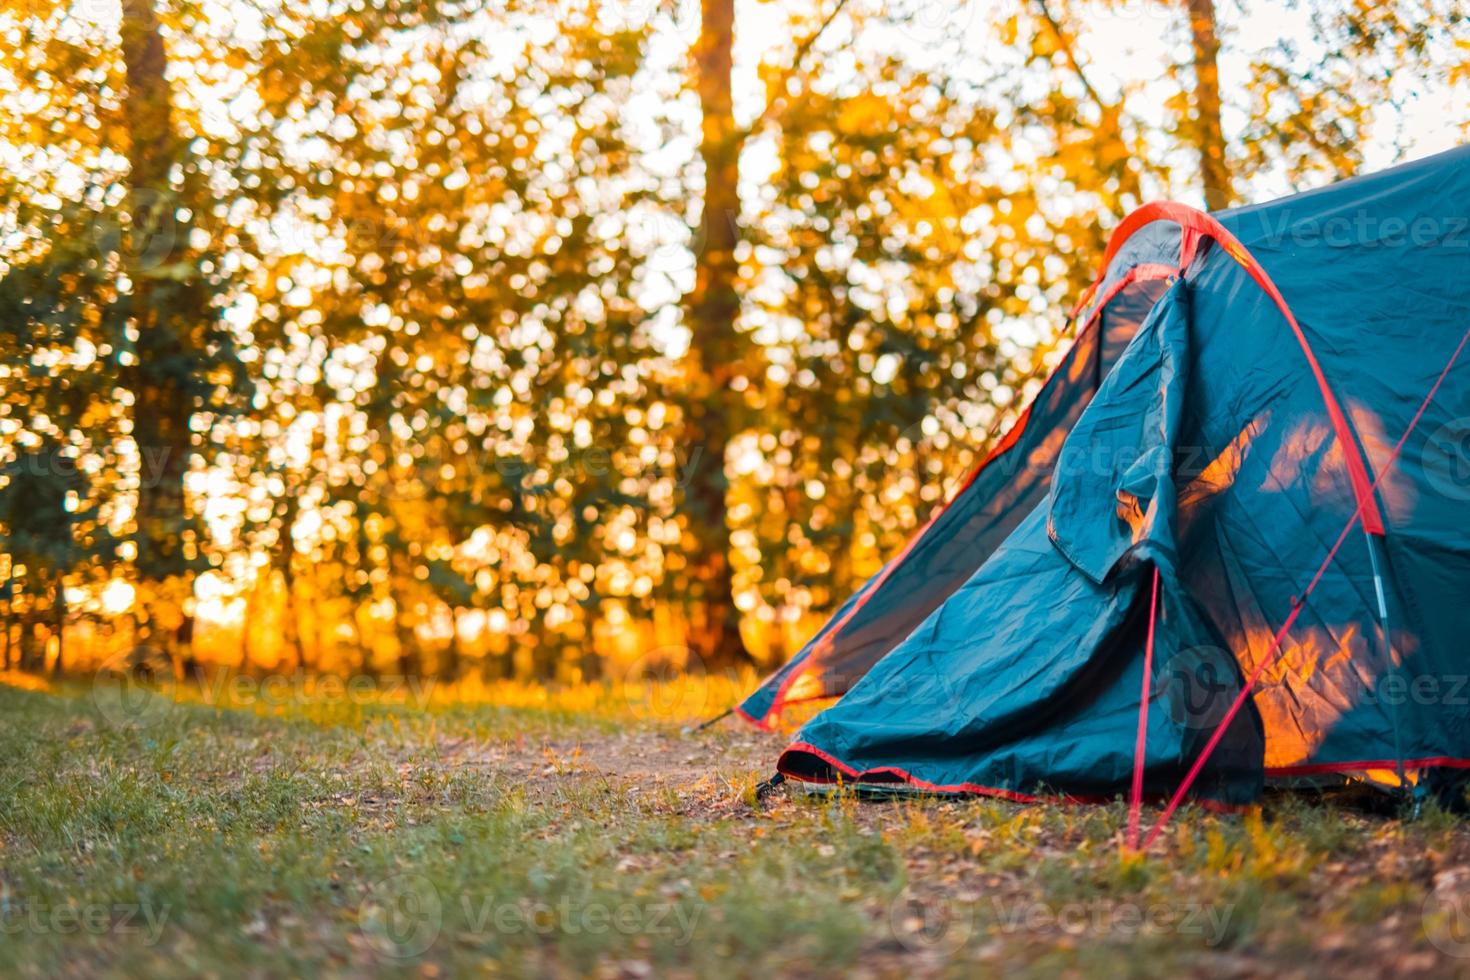 Camping tent in the forest with sunset and beautiful blurred nature scenery. Trees and sun rays in summer spring park. Hiking as recreational activity, outdoor nature forest scene photo